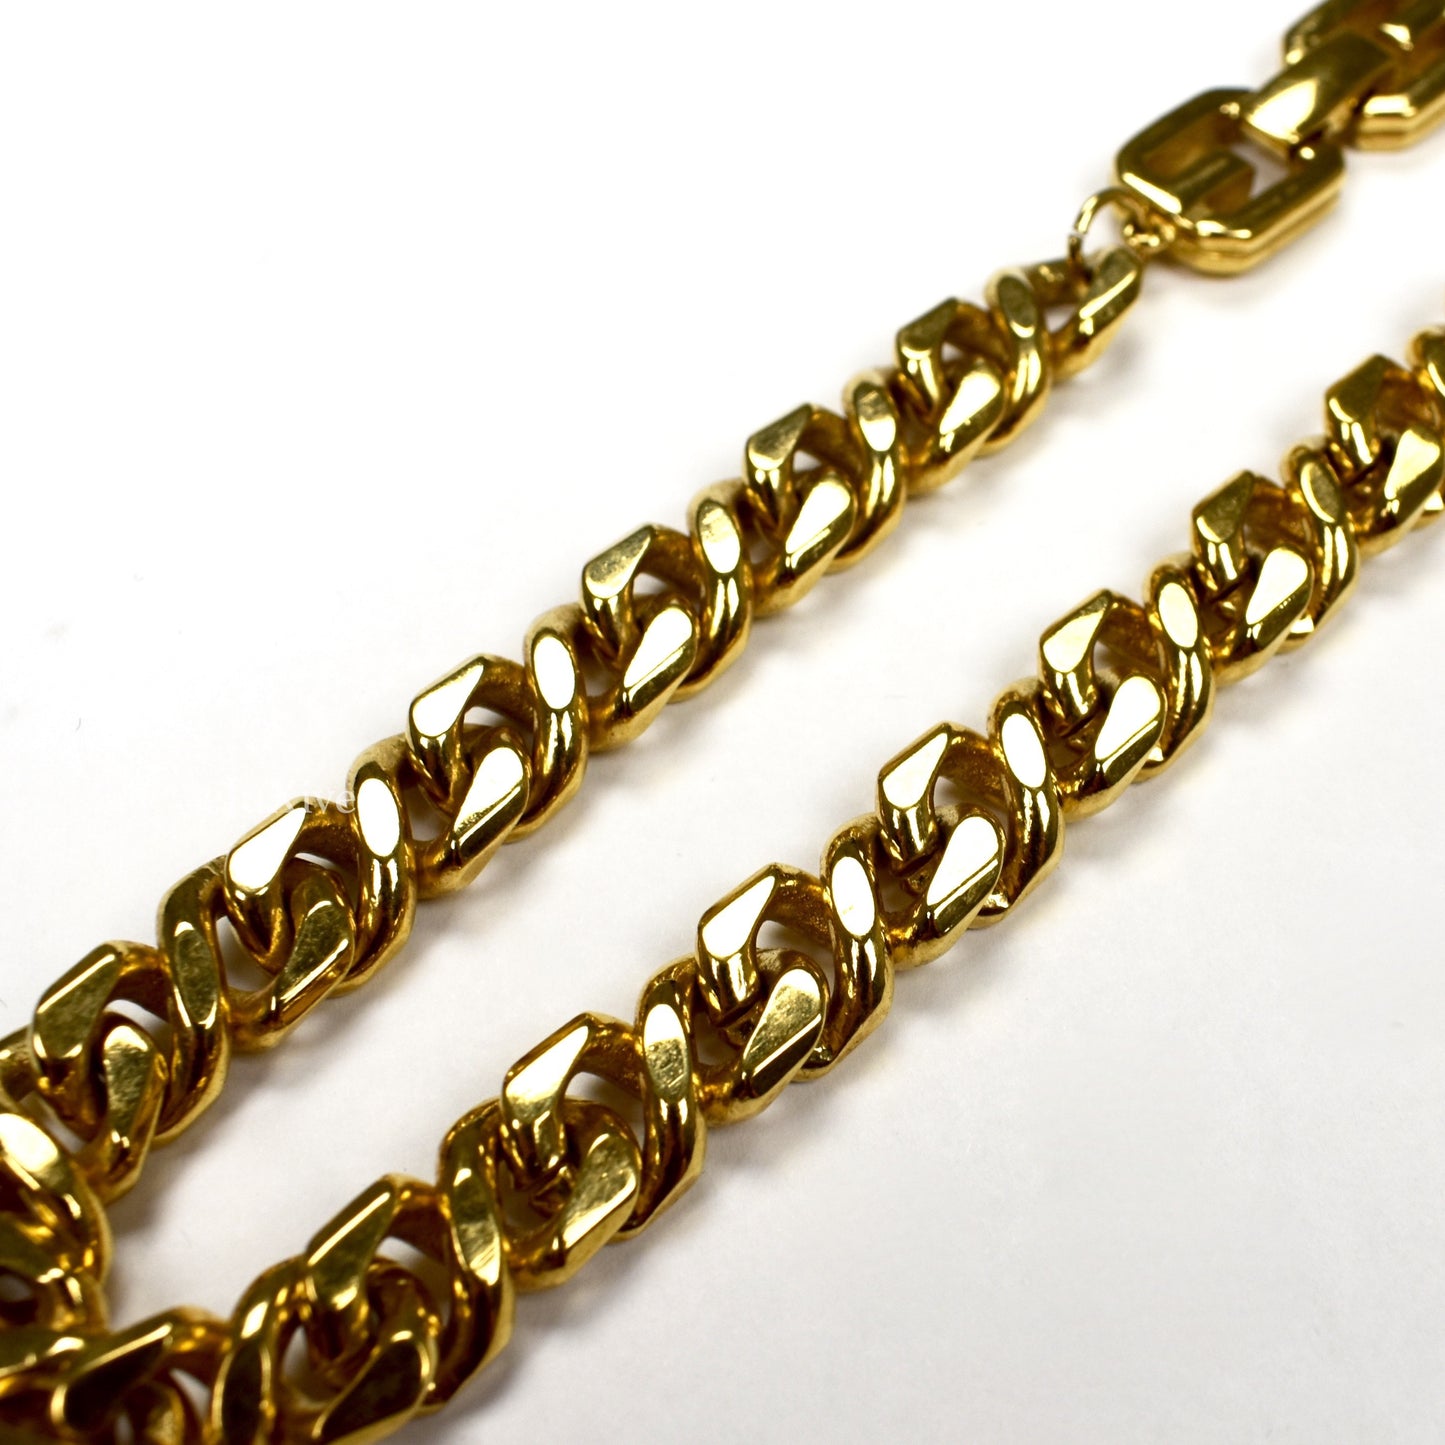 Givenchy - 18.75" Gold Curb Link Chain Necklace